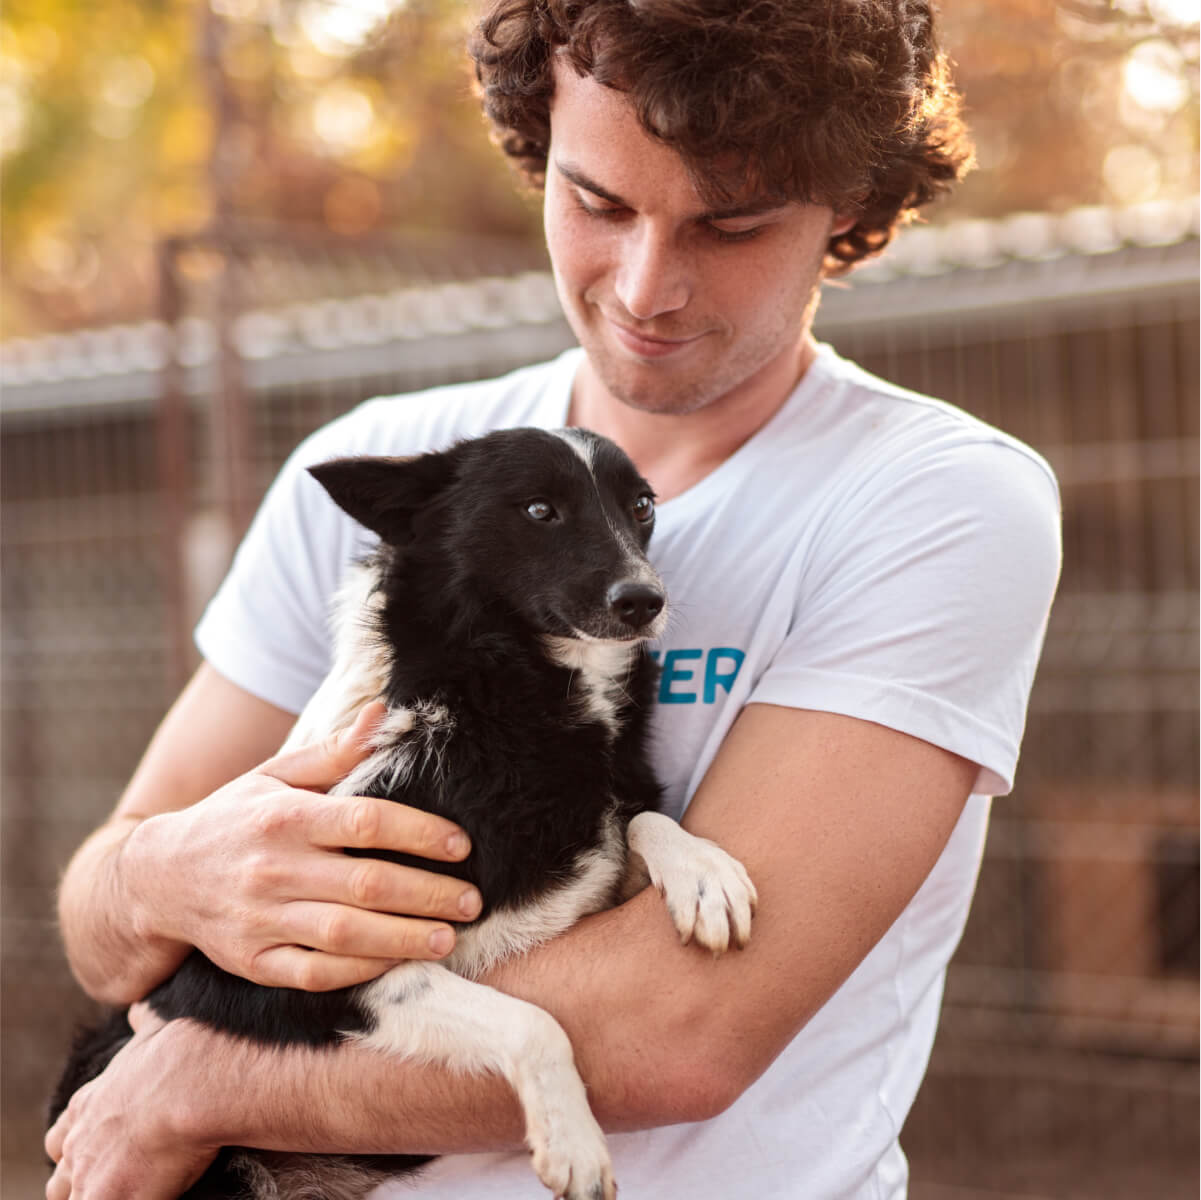 Volunteer on location Images of a man with a Dog